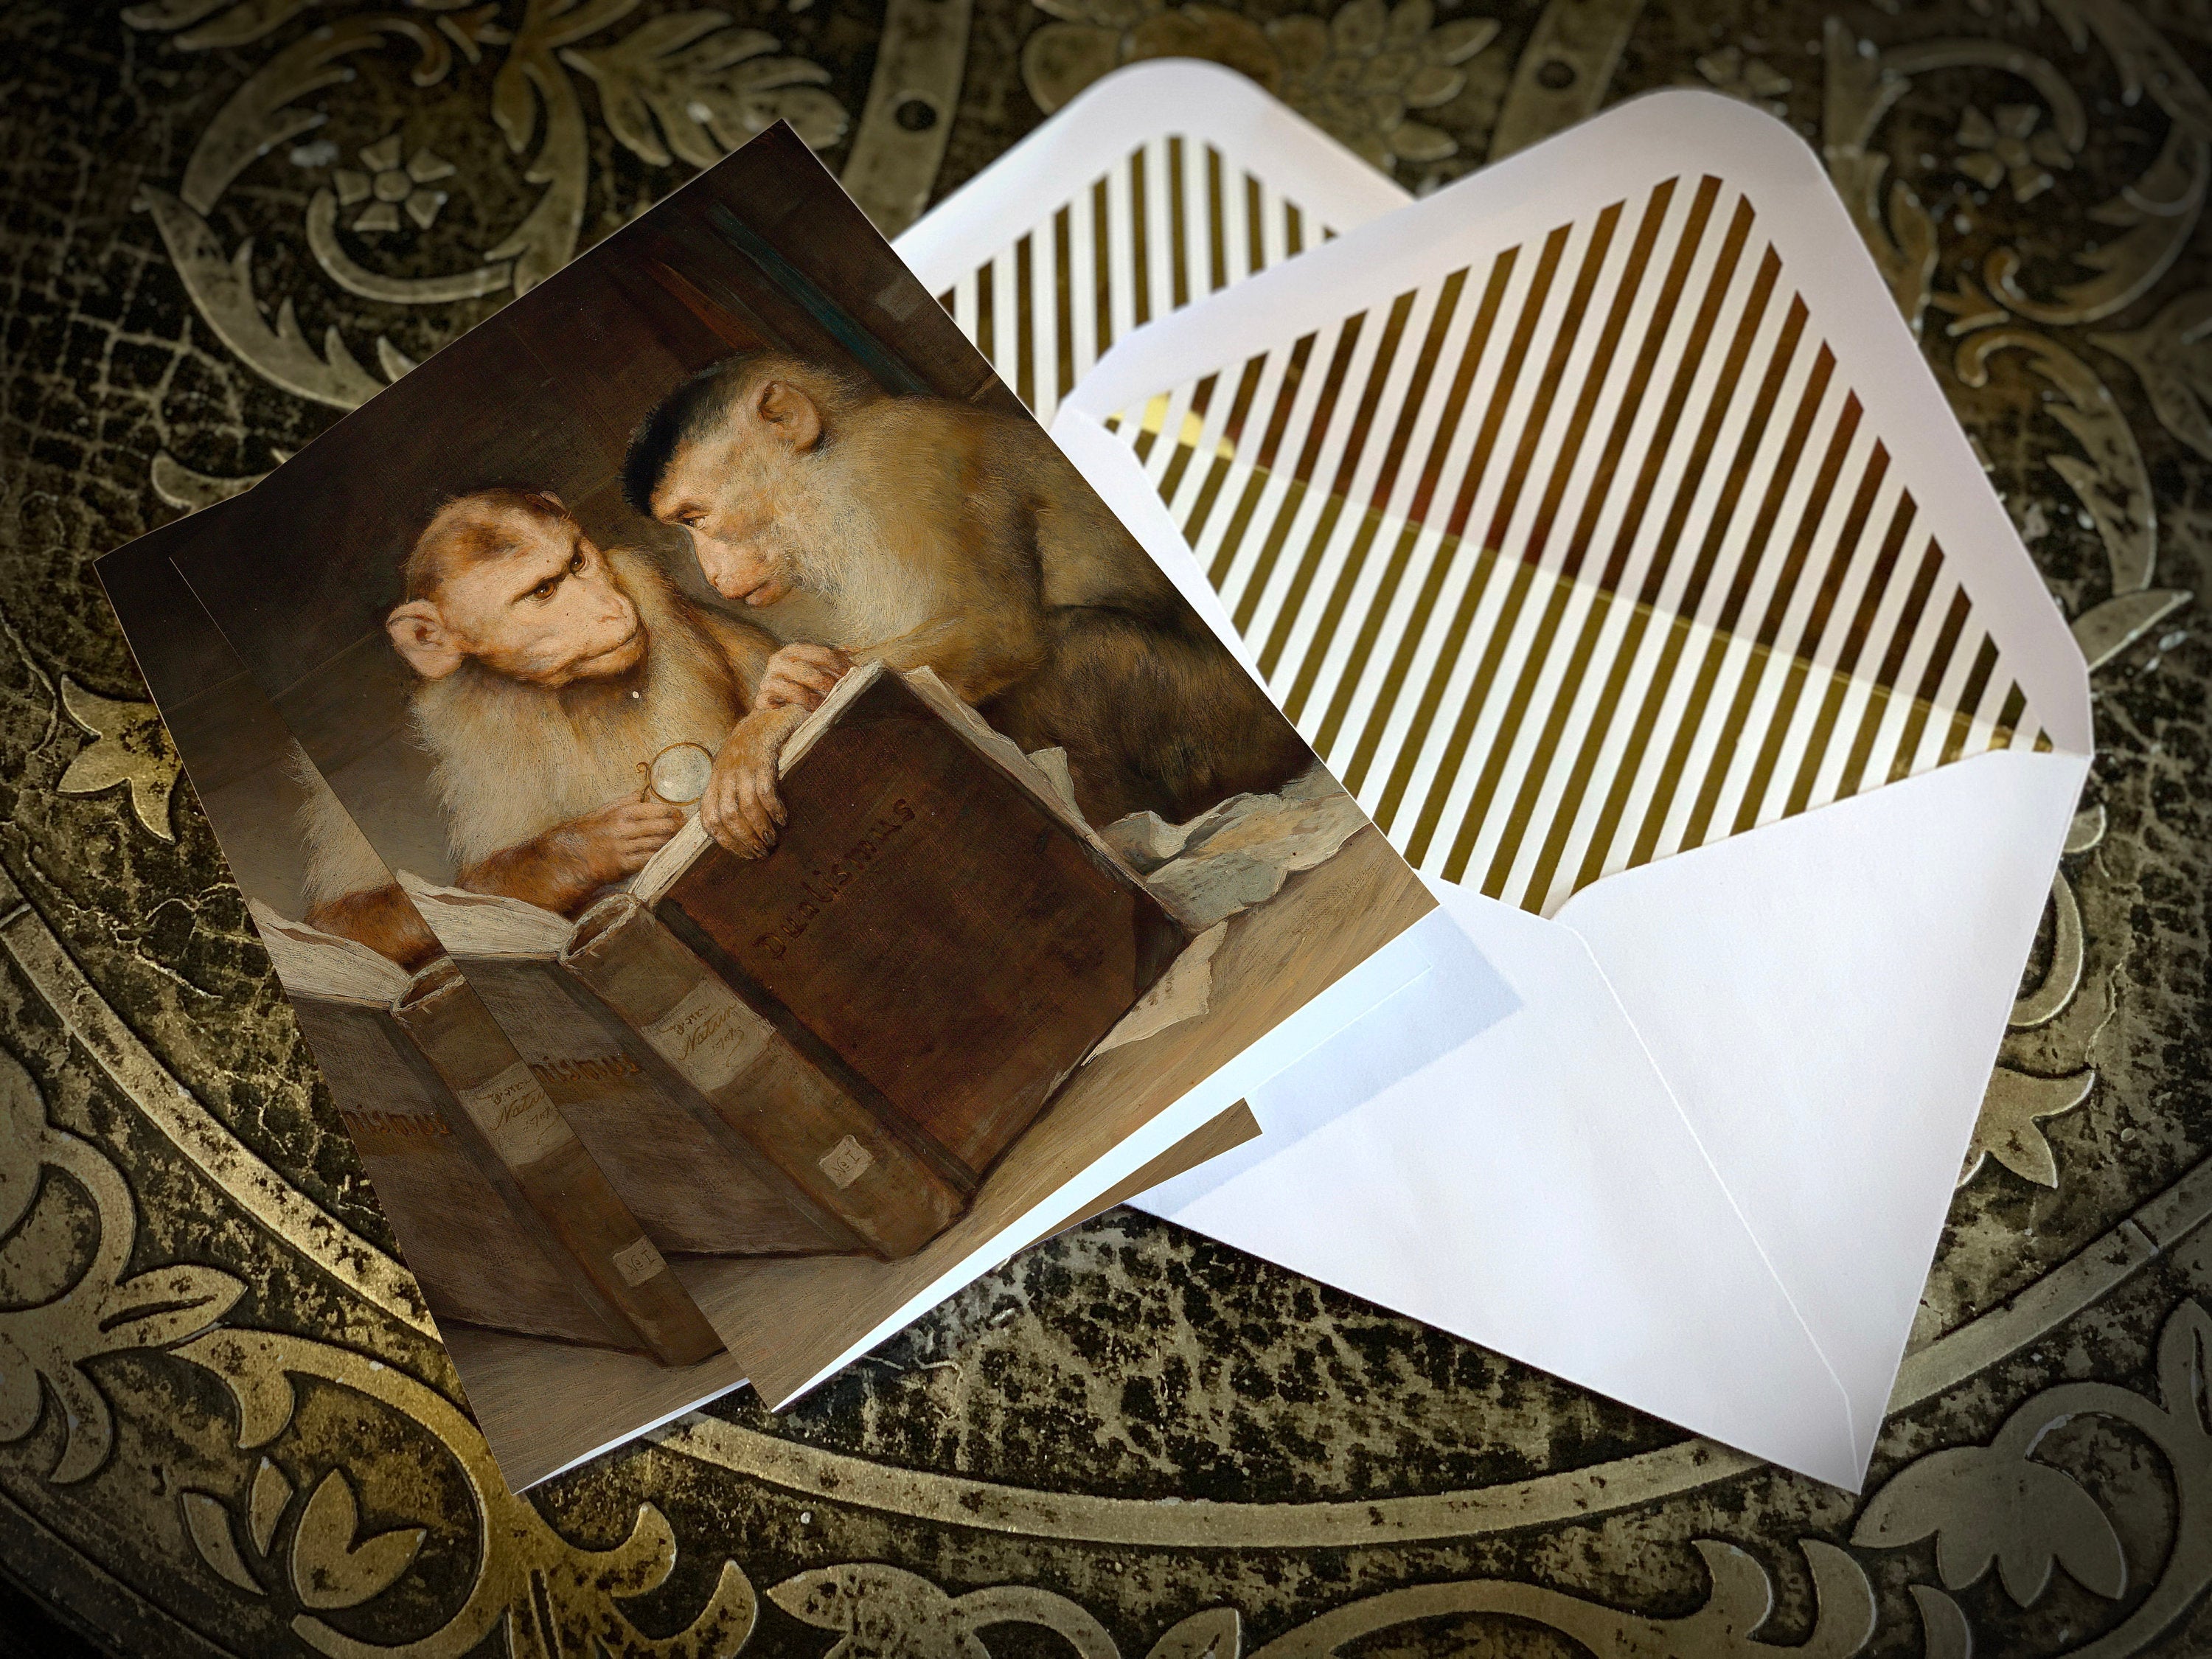 The Monkey Scholars, Bookish Greeting Card with Elegant Striped Gold Foil Envelope, 1 Card/Envelope